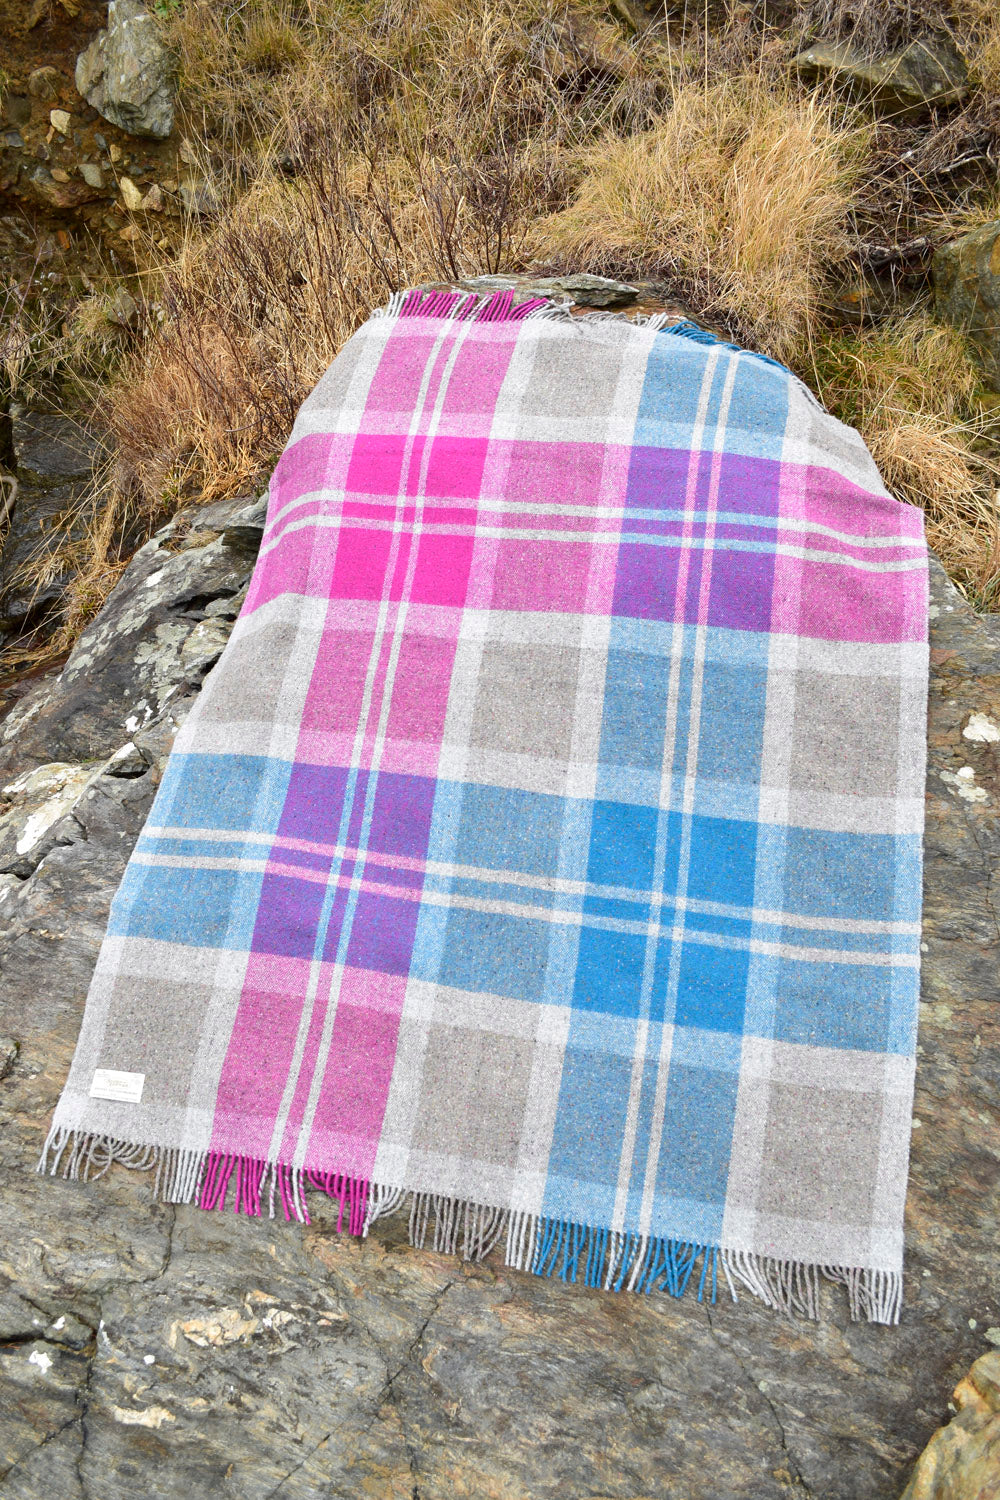 Blueberry Plaid Blanket by Studio Donegal